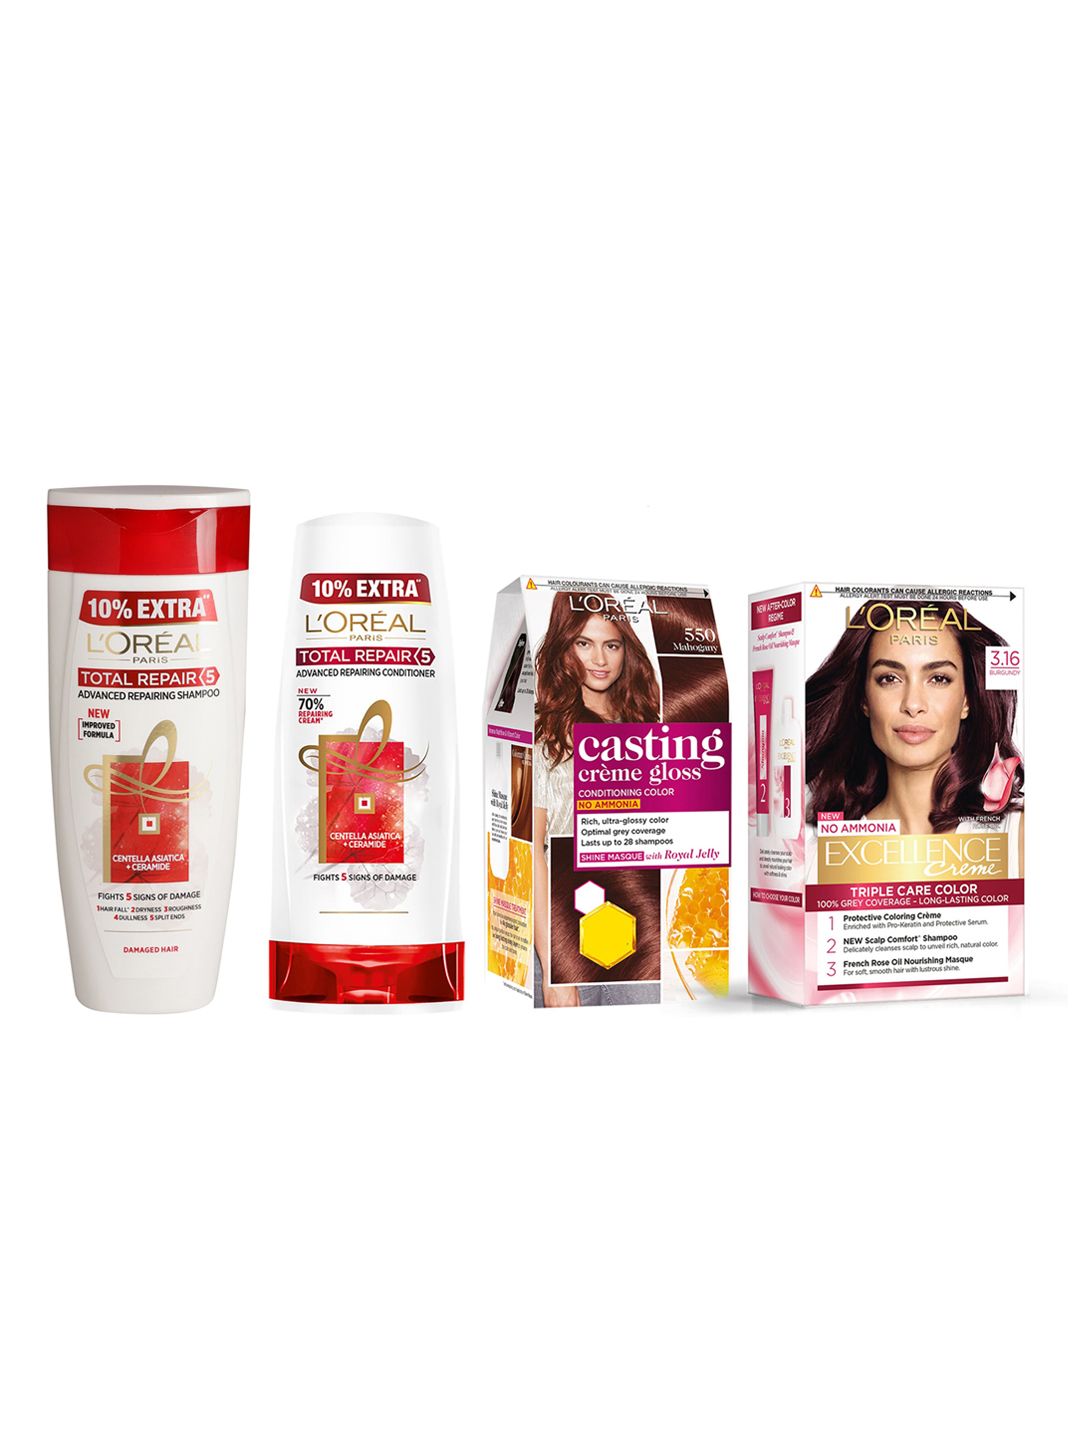 Loreal Paris Set of 2 Hair Colour With Toal Repair 5 Shampoo & Conditioner Price in India